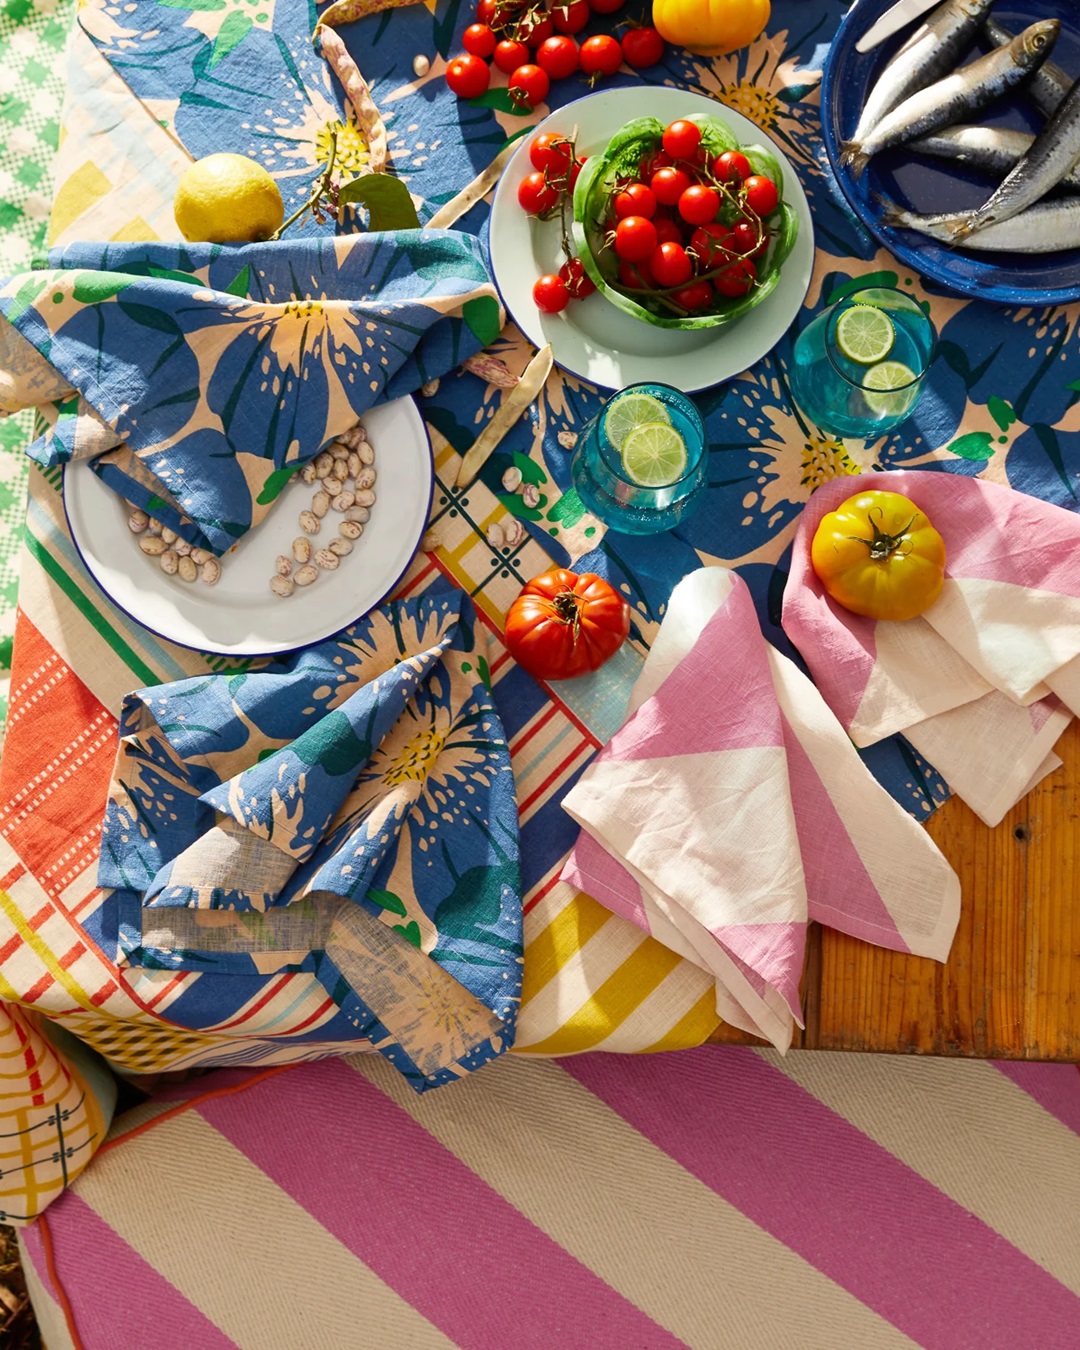 Colourful dining table with food, table cloth, napkins and food